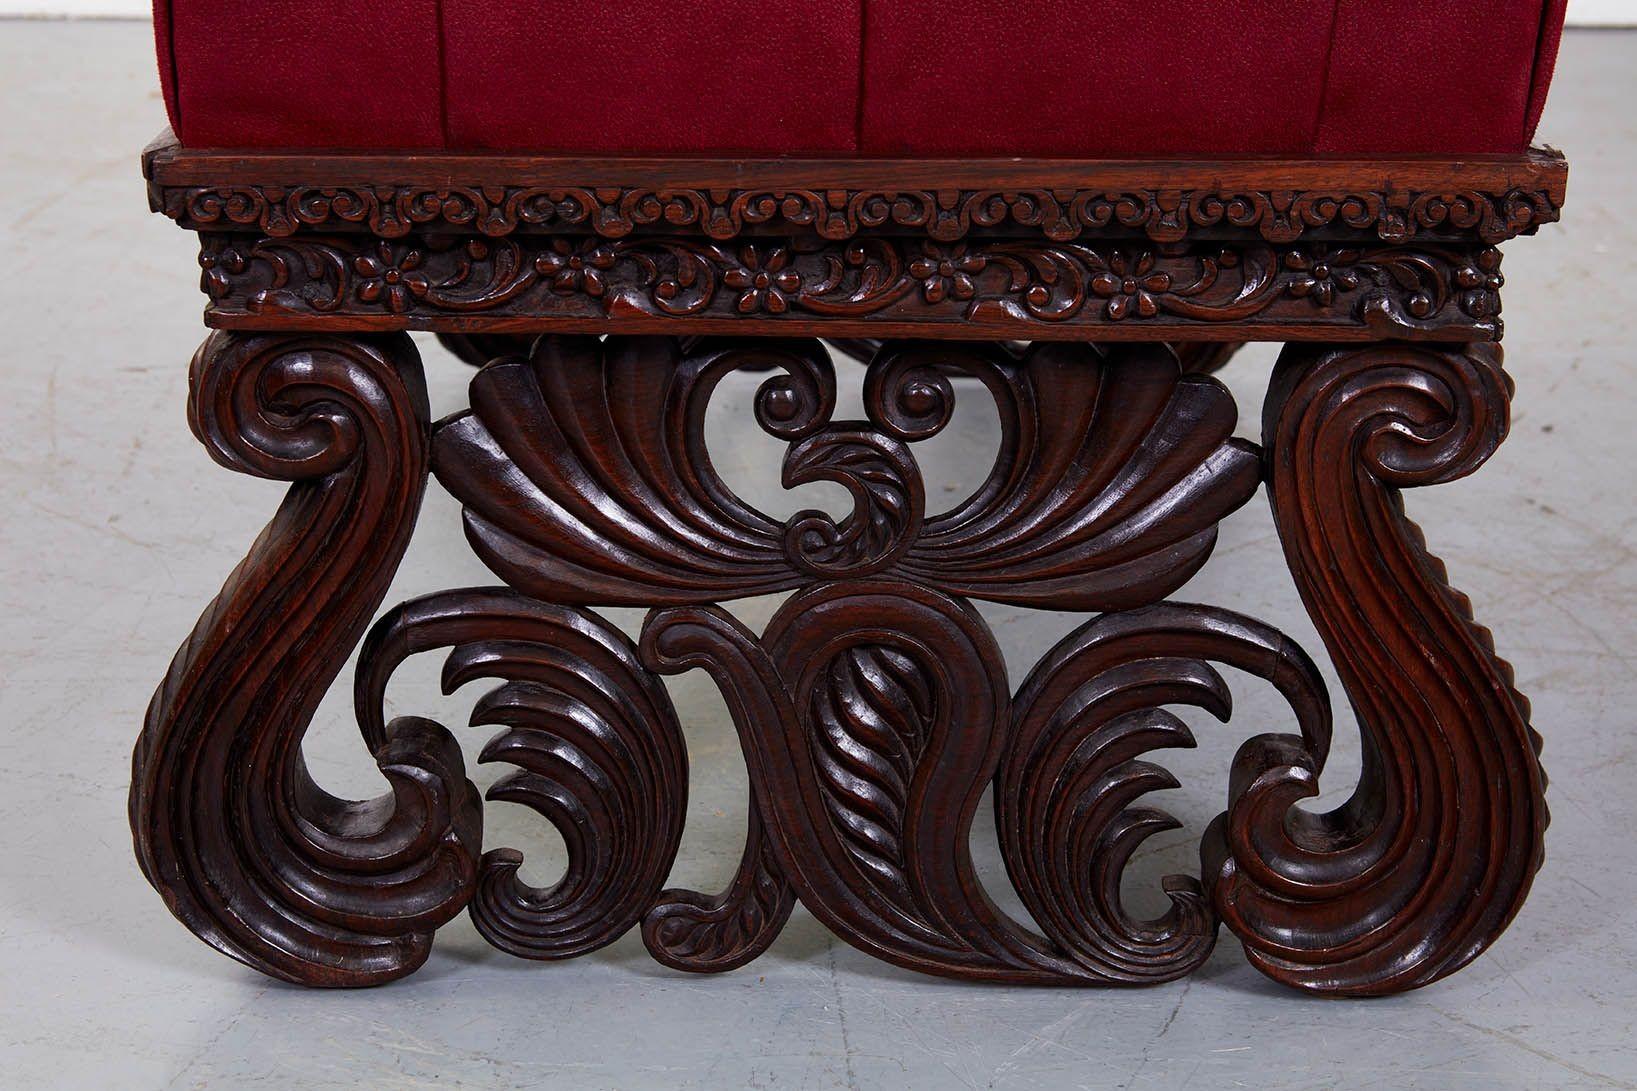 An important Indian Raj ottoman of substantial size with button tufted hand-dyed leather upholstered top on gloriously elaborate hardwood frame with finely carved open fret apron over coiled scroll foliate legs depicting stylized peacocks, Indian,